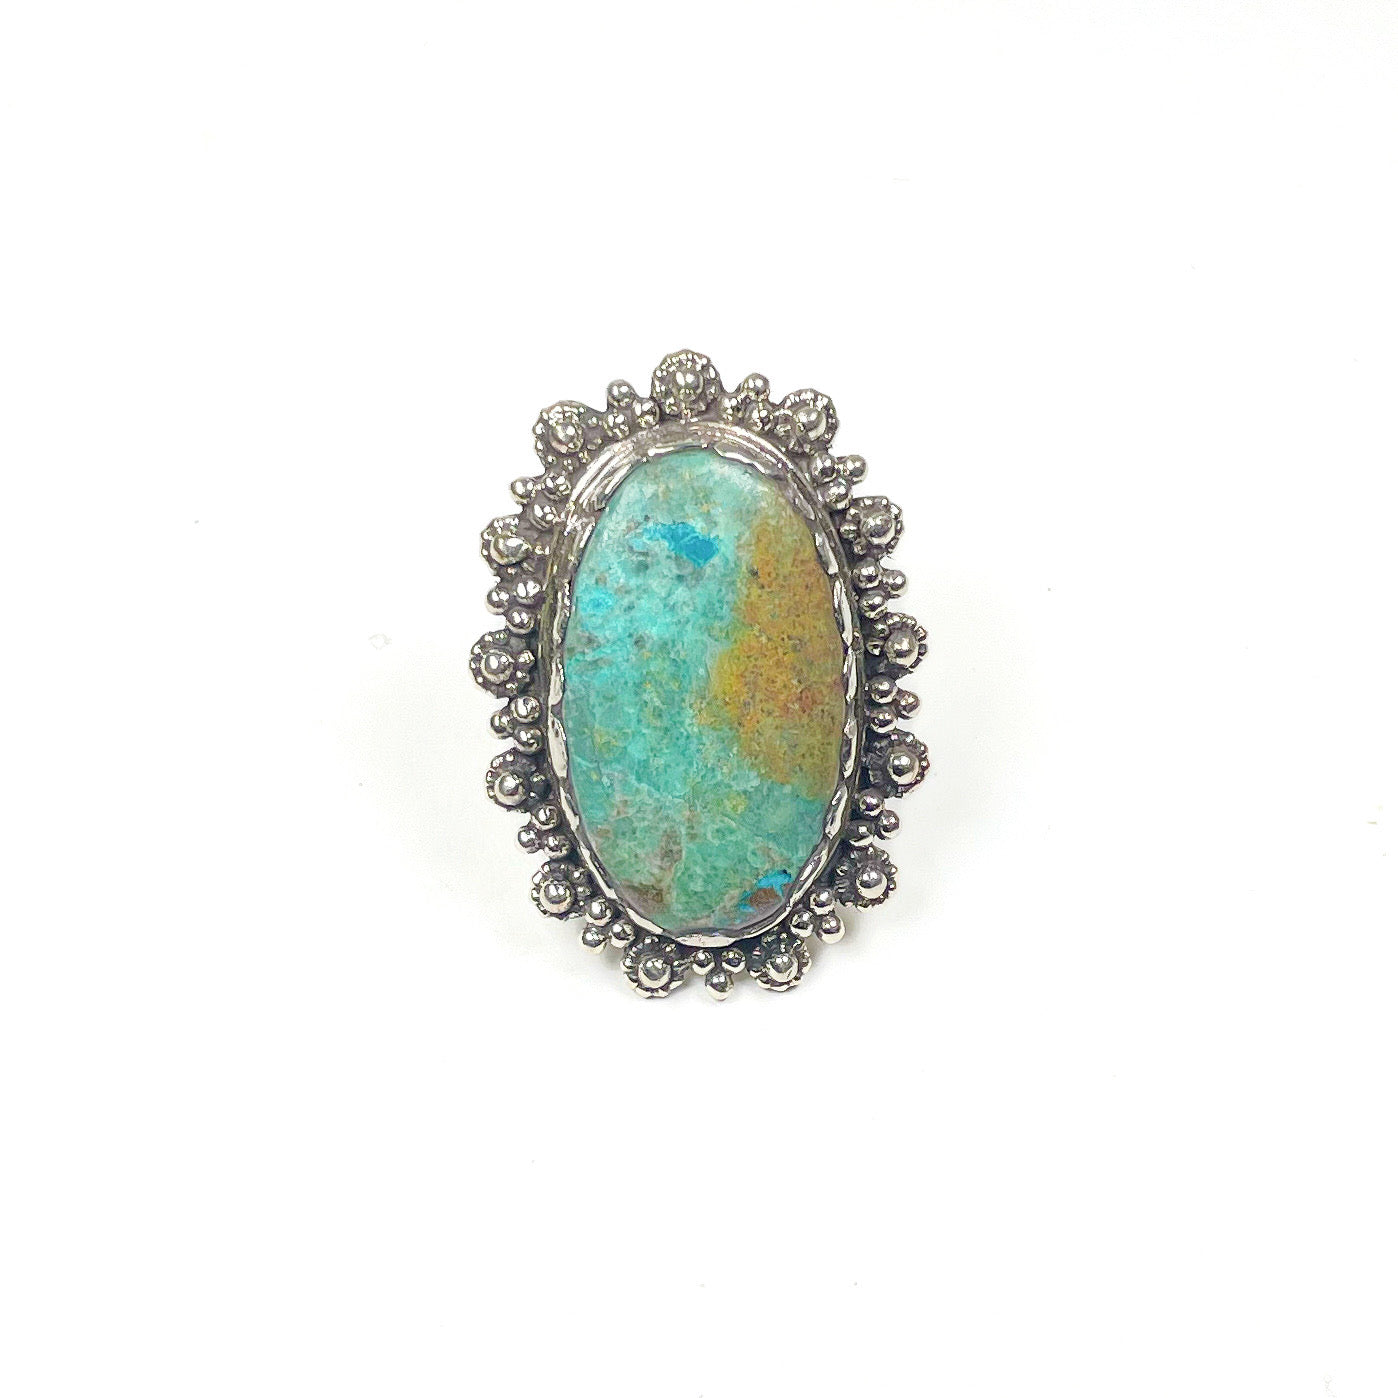 Teal and tan chrysocolla oval stone ring with a silver metal intricate floral border